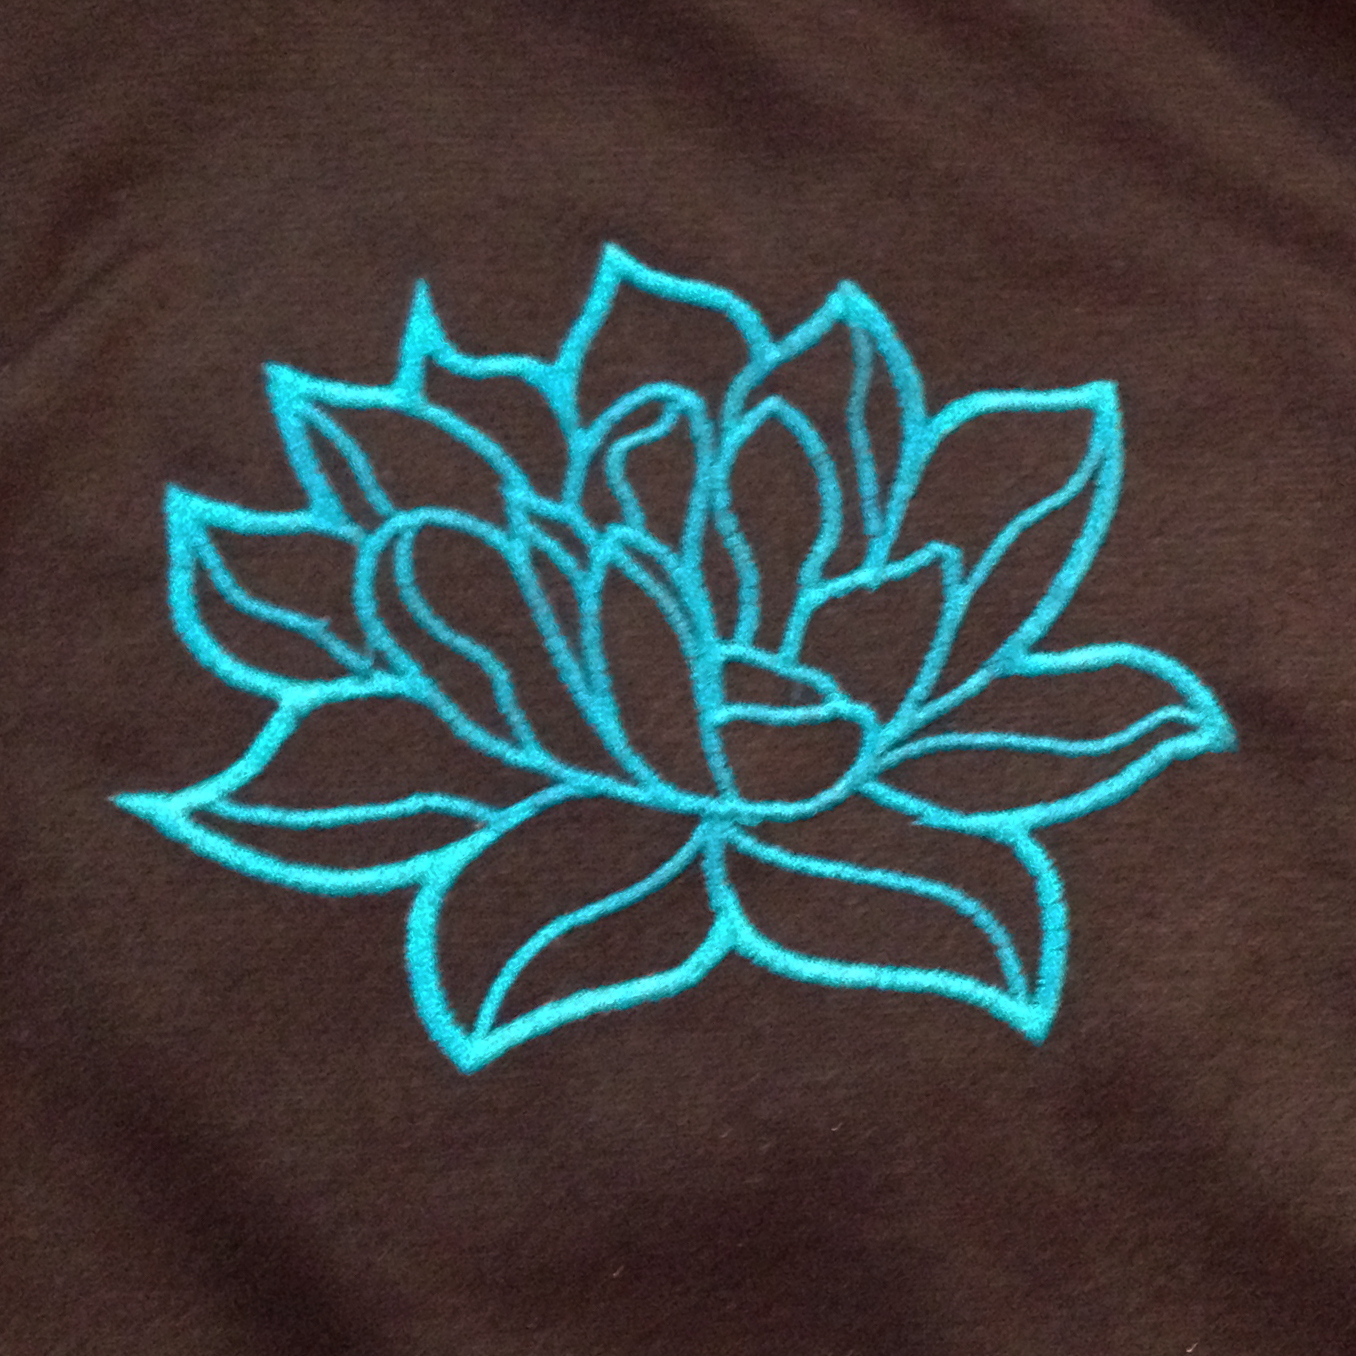 Funky Embroidery Patterns Modern And Elegant Lotus Flower Applique Embroidery Design Simple Lotus Flower Is Perfect Symbol Of Good Fortune In Buddhism